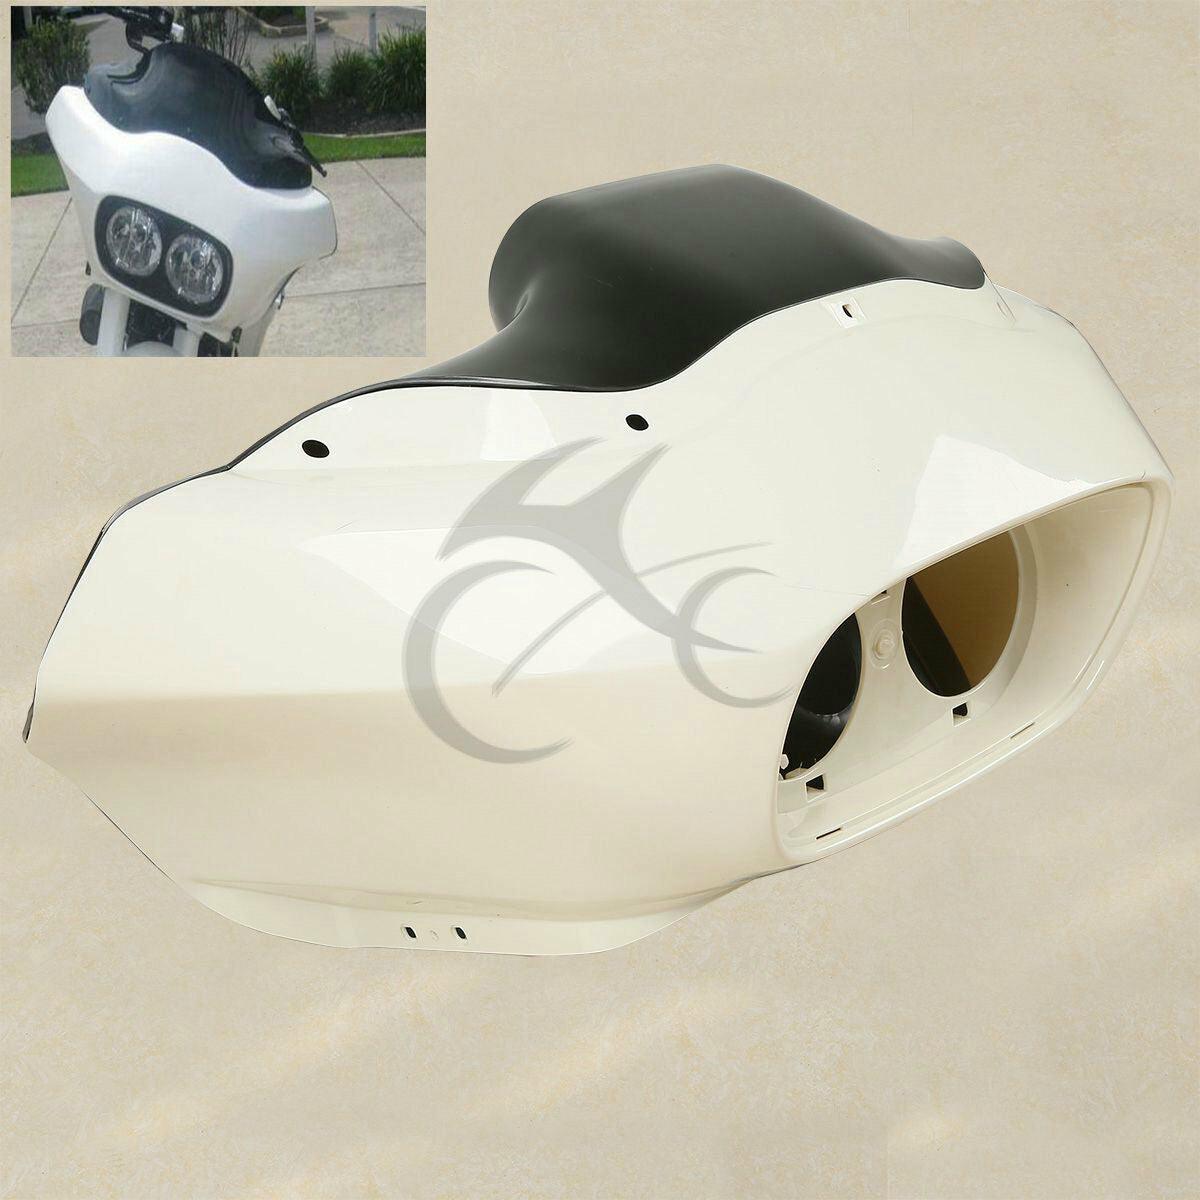 Inner Outer Fairings & LED Headlight Fit For Harley Touring FLTR 1998-2013 12 US - Moto Life Products